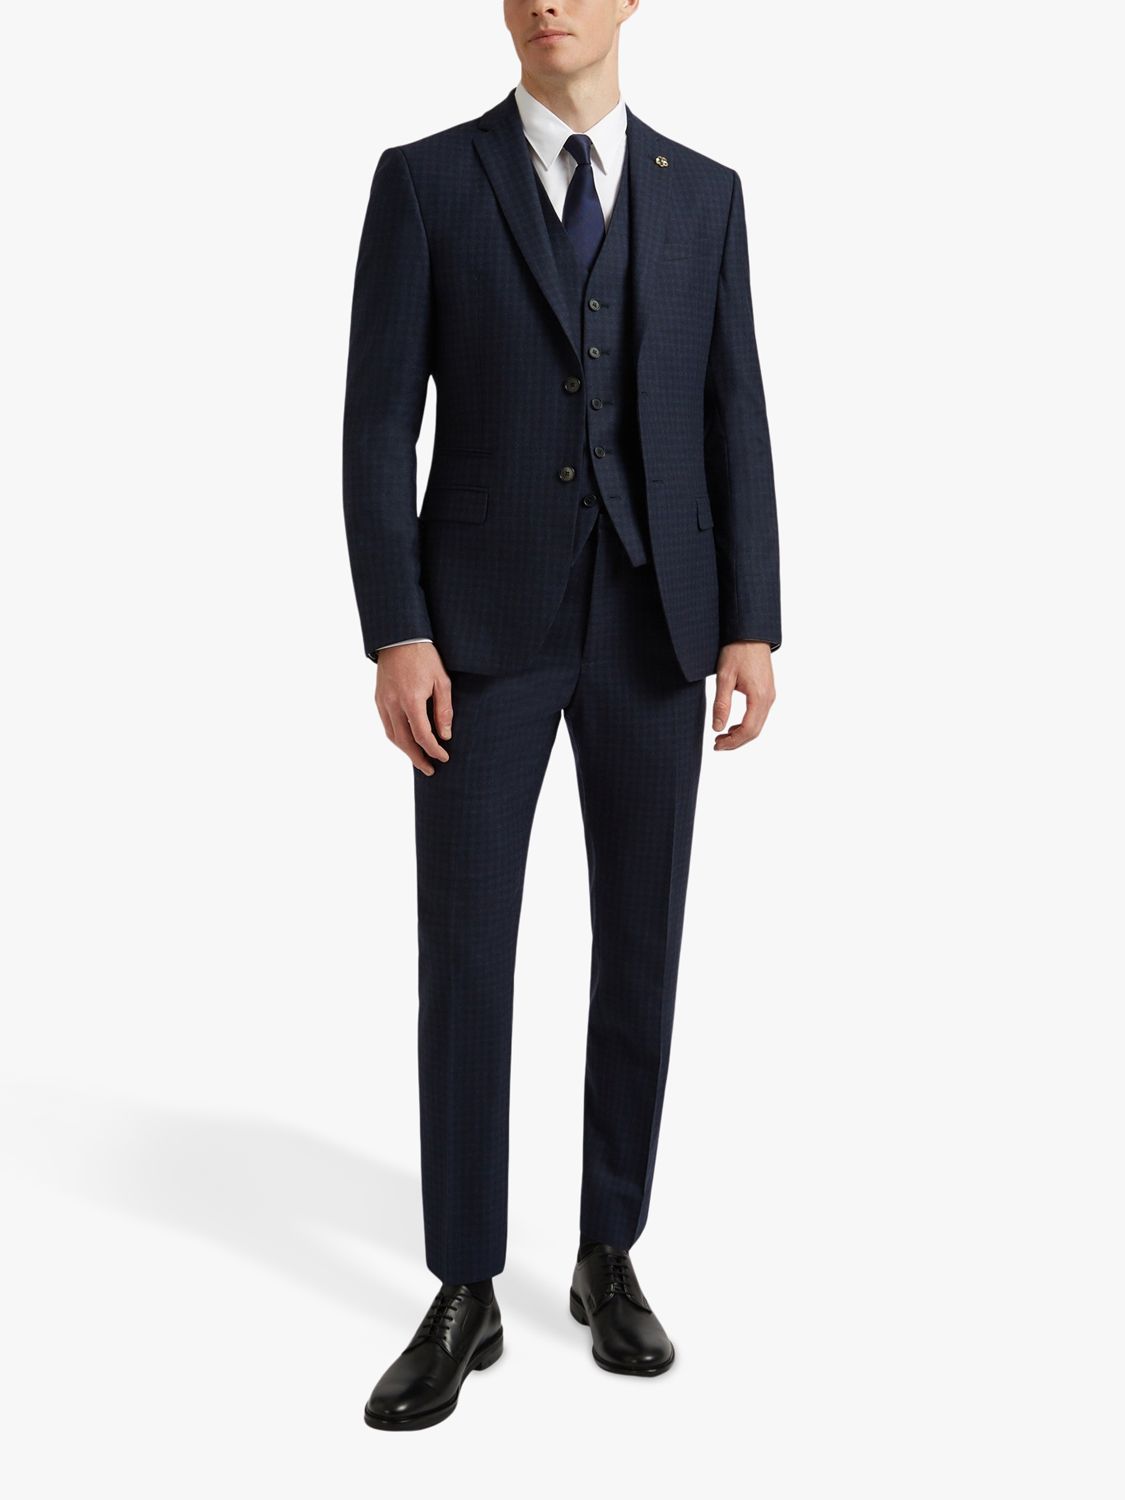 Ted Baker Check Wool Cashmere Blend Suit Jacket, 170 Navy Check, 38R